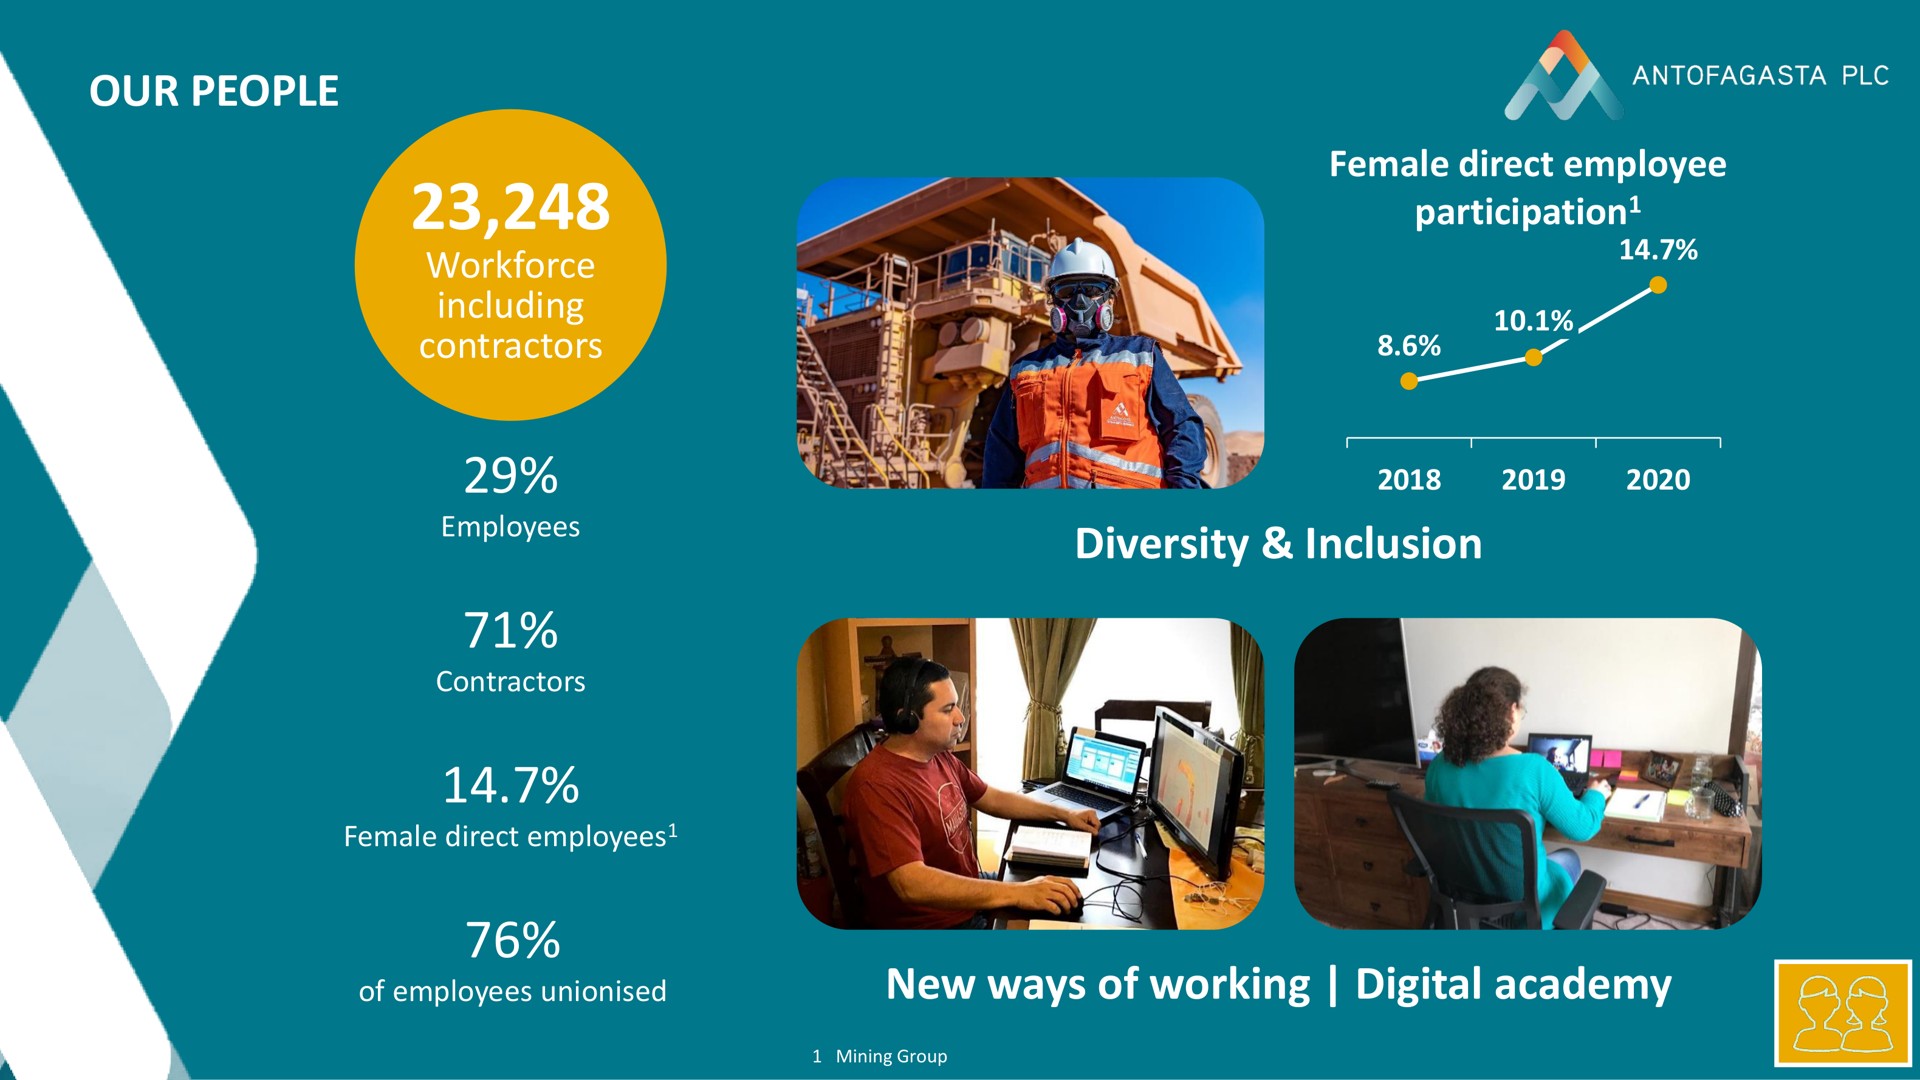 our people diversity inclusion new ways of working digital academy | Antofagasta